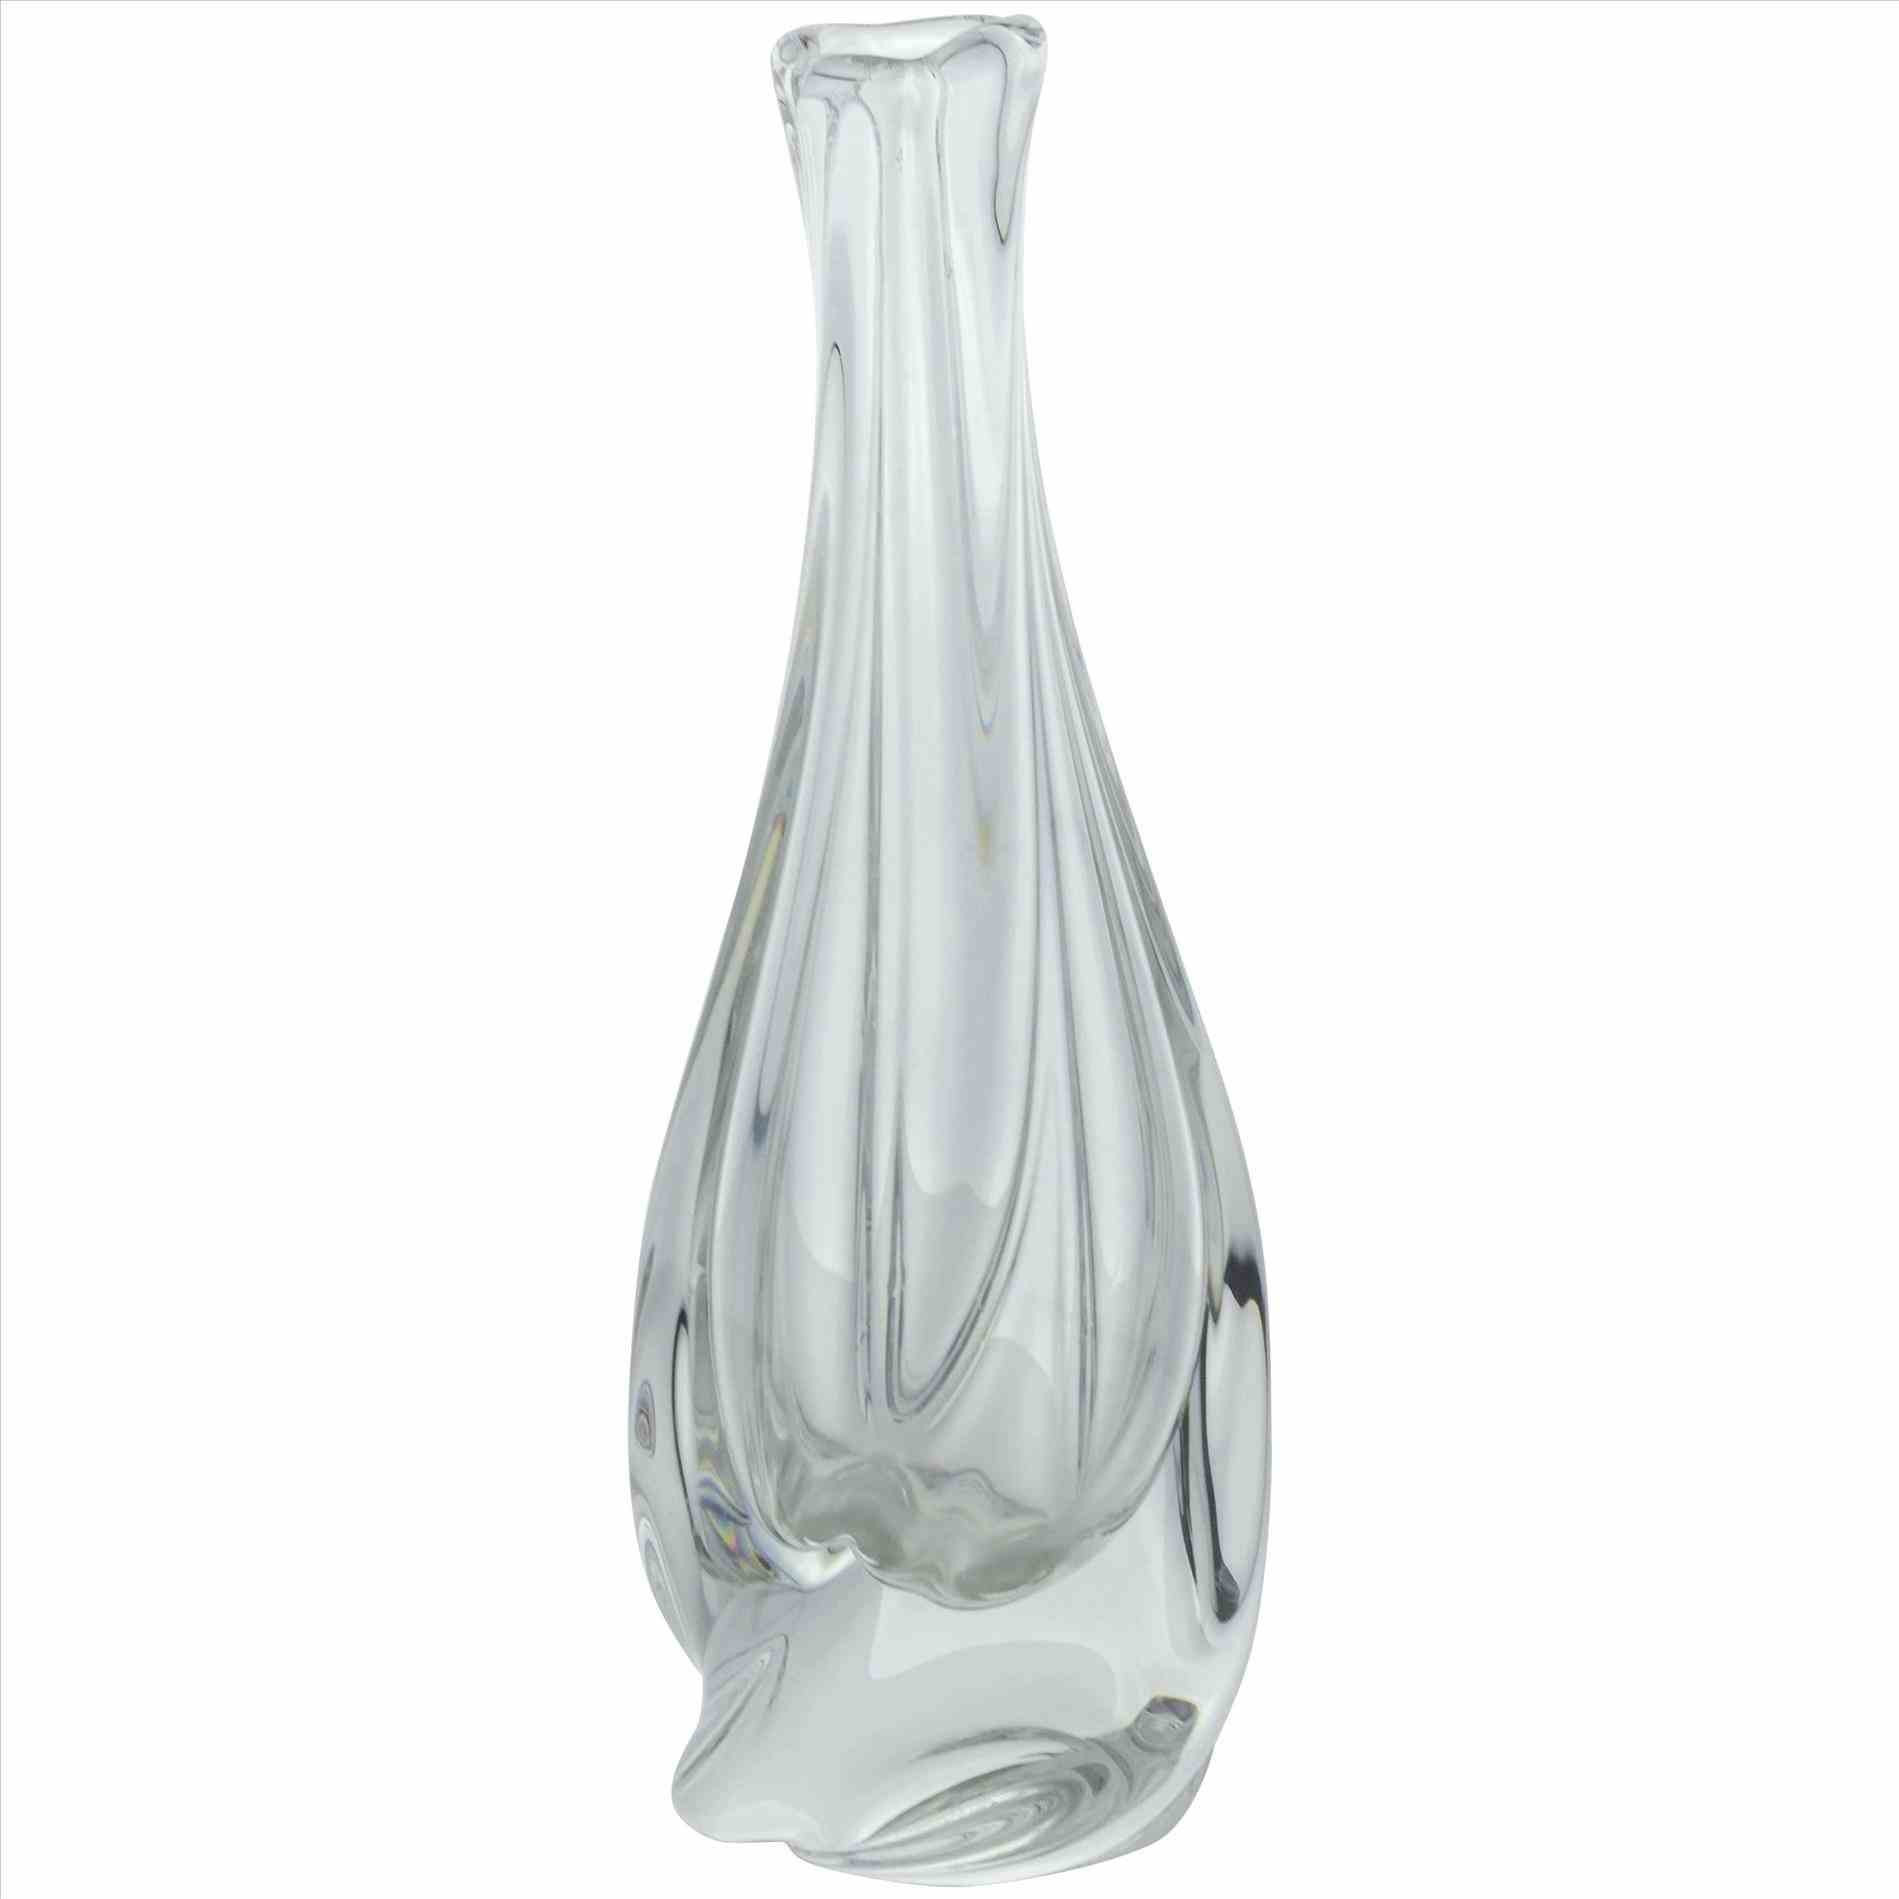 12 Great Cheap Glass Flower Vases wholesale 2022 free download cheap glass flower vases wholesale of silver vases wholesale pandoraocharms us in silver vases wholesale for u flowers and supplies